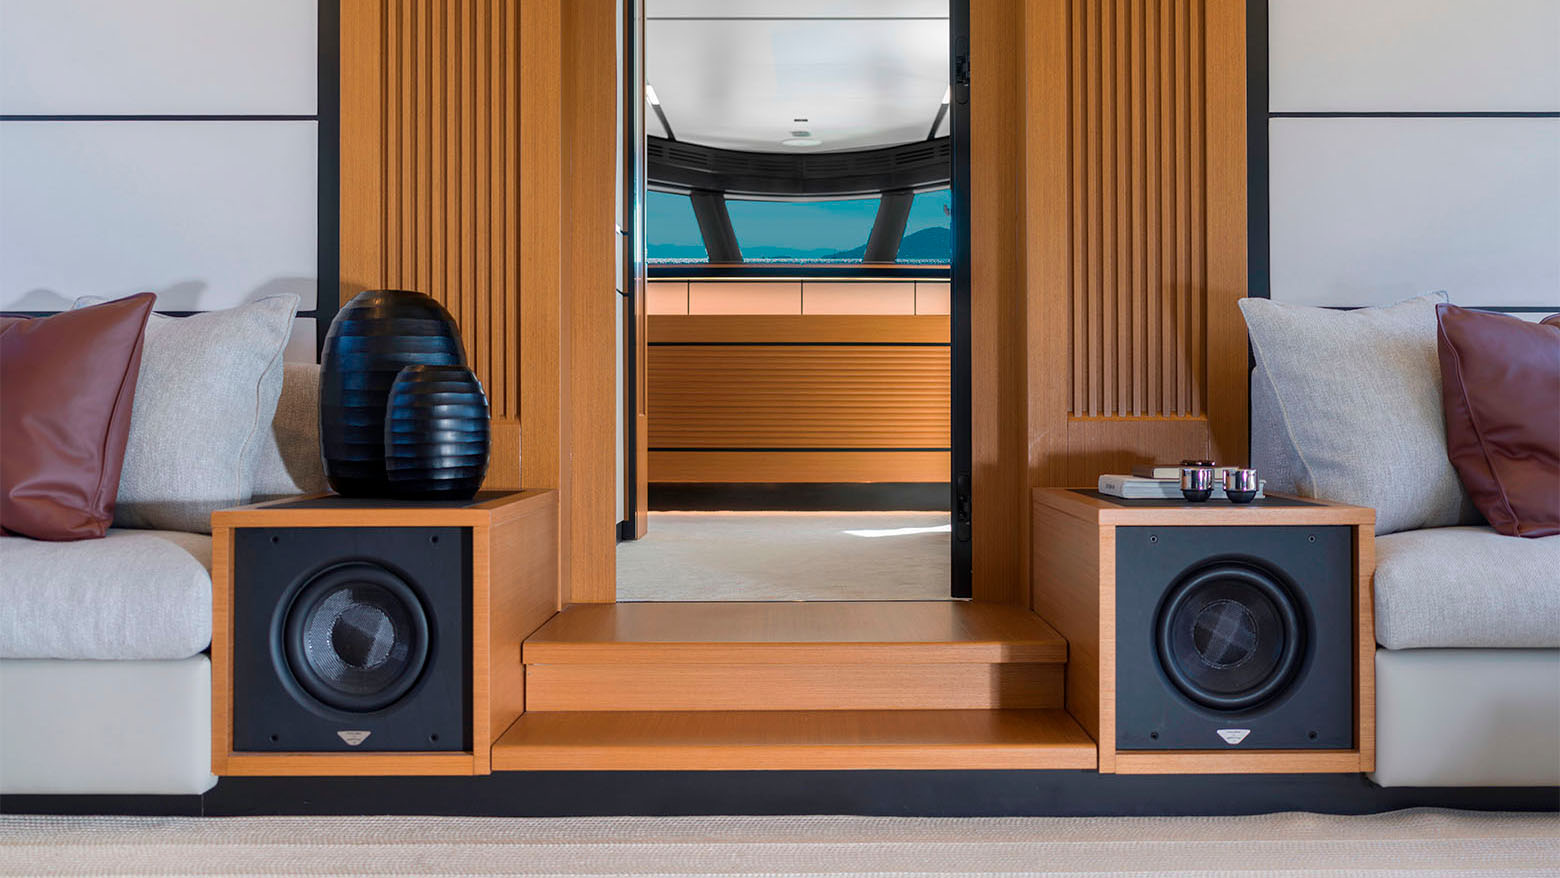 McIntosh amplifiers and Wally yachts